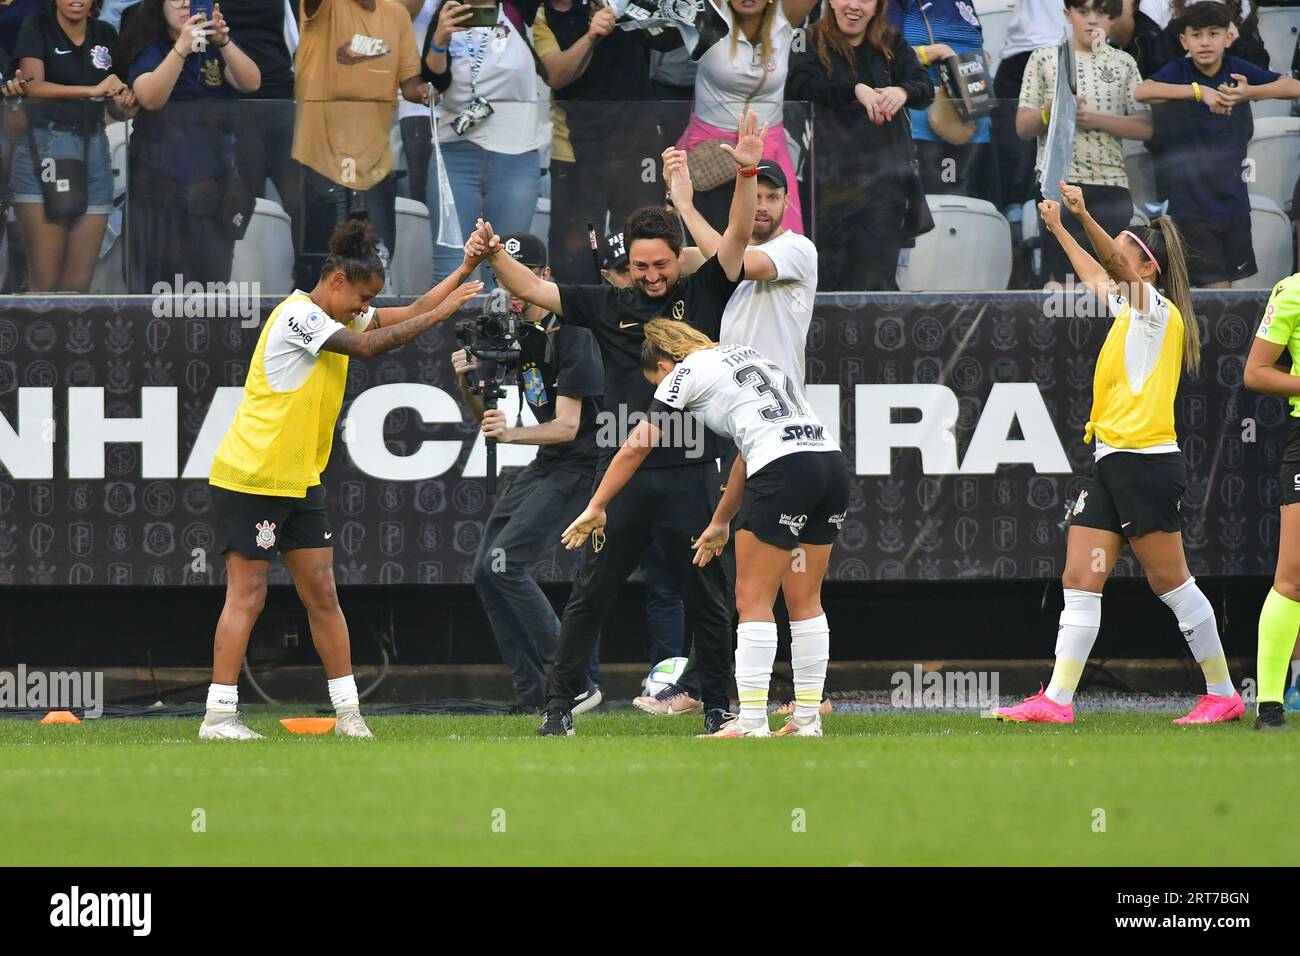 SAO PAULO, BRAZIL - SEPTEMBER 10: Tamires of Corinthians celebrates after scoring a goal during a match between Corinthians and Ferroviaria as part of final of Brazilian League Serie A at Neo Química Arena on September 10, 2023 in São Paulo, Brazil. (Photo by Leandro Bernardes/PxImages/Sipa USA) Credit: Sipa USA/Alamy Live News Stock Photo